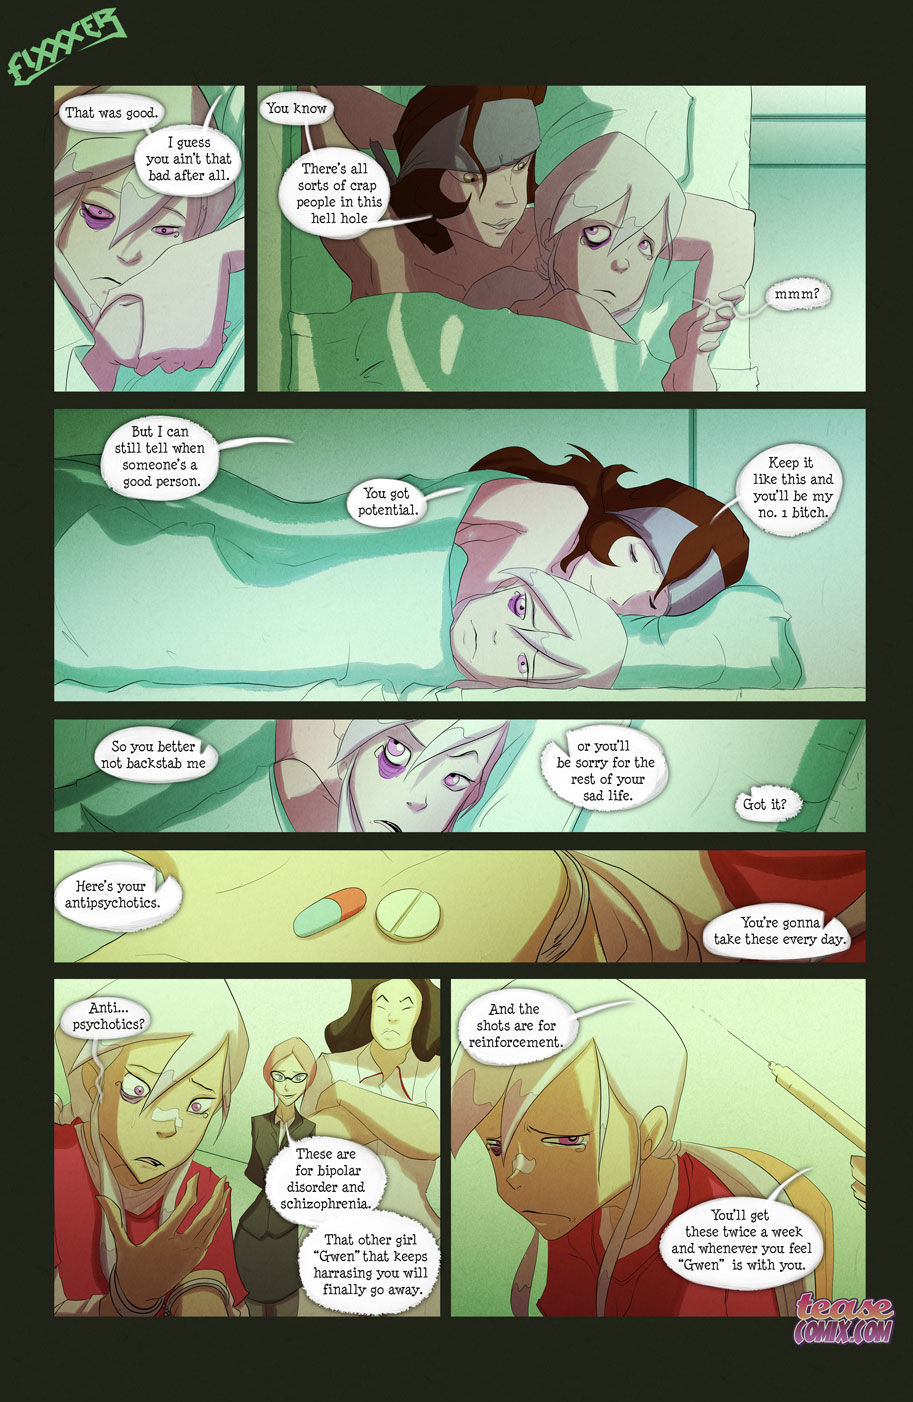 Fixxxer - The witch with no name, Ben 10 page 18